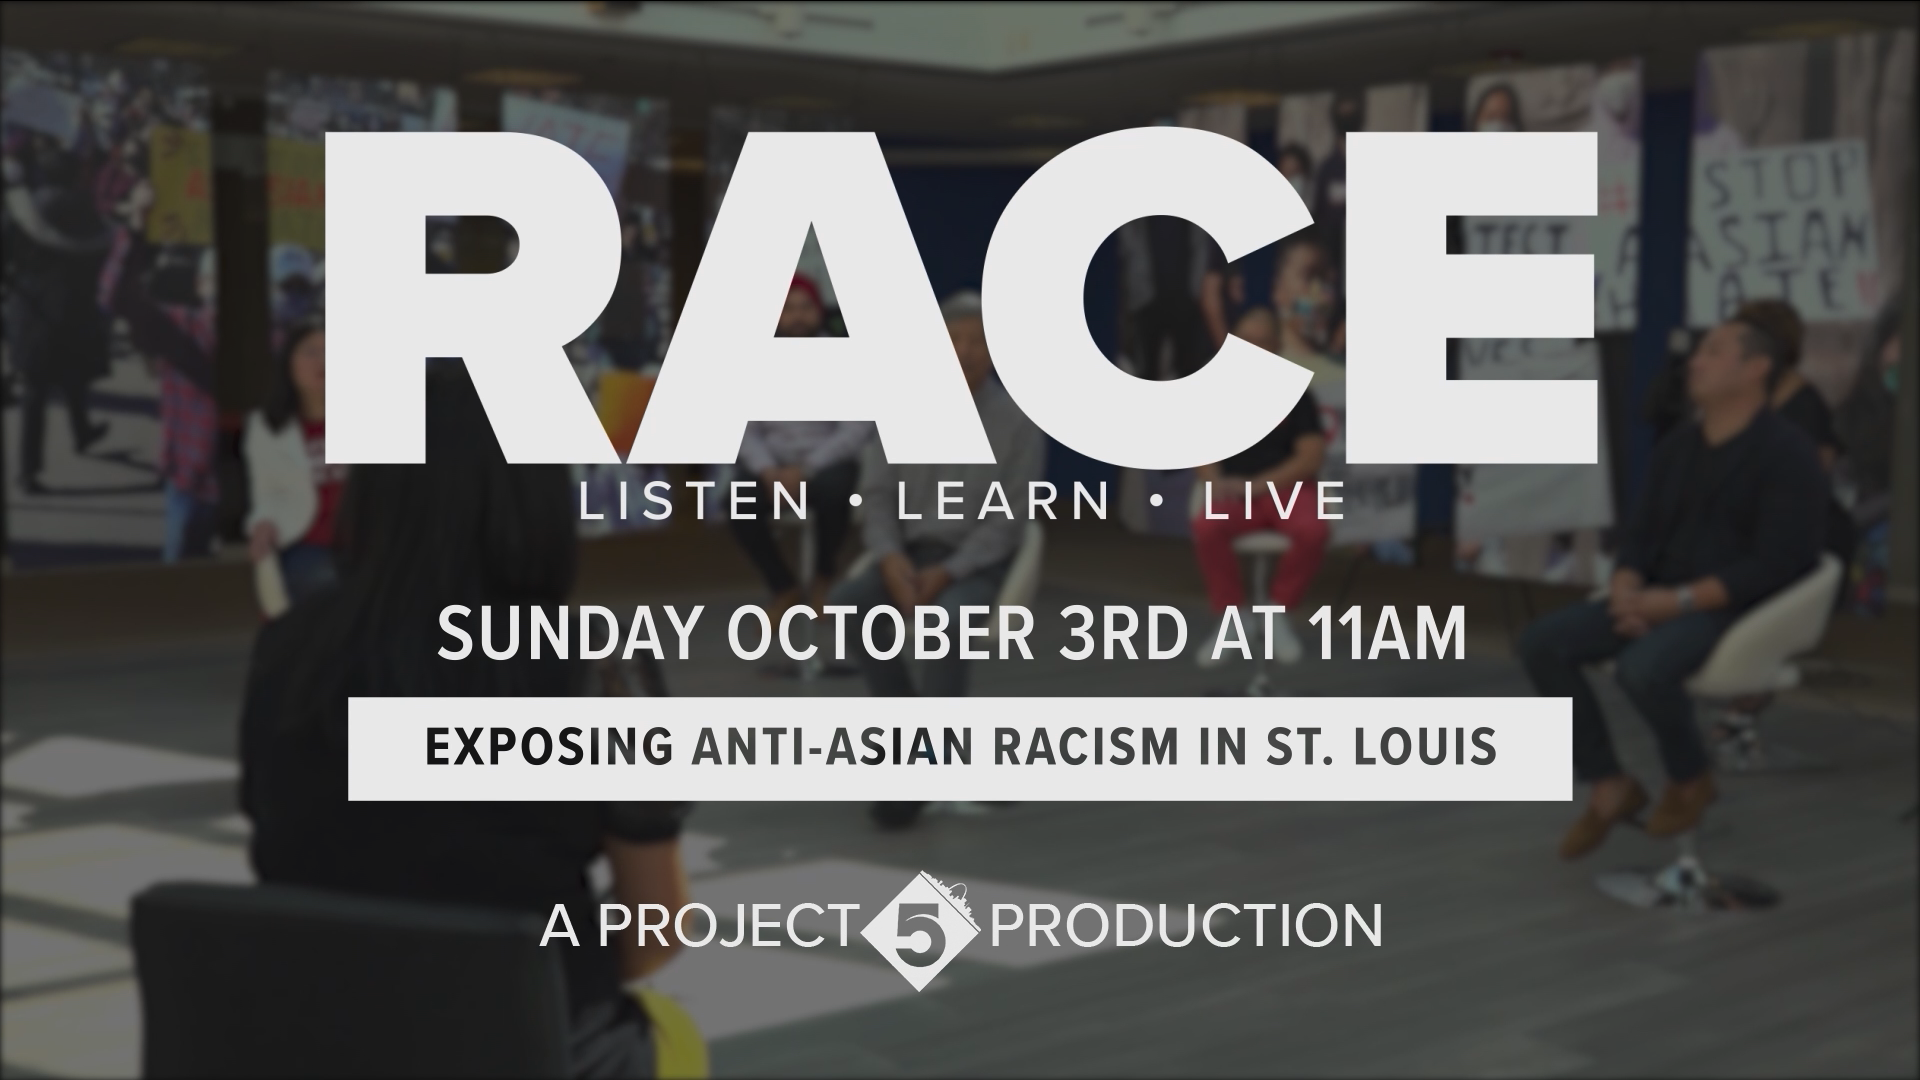 5 On Your Side presents “Race. Listen. Learn. Live.” This program discusses the impact of attacks and hate directed toward people of AAPI heritage in St. Louis.